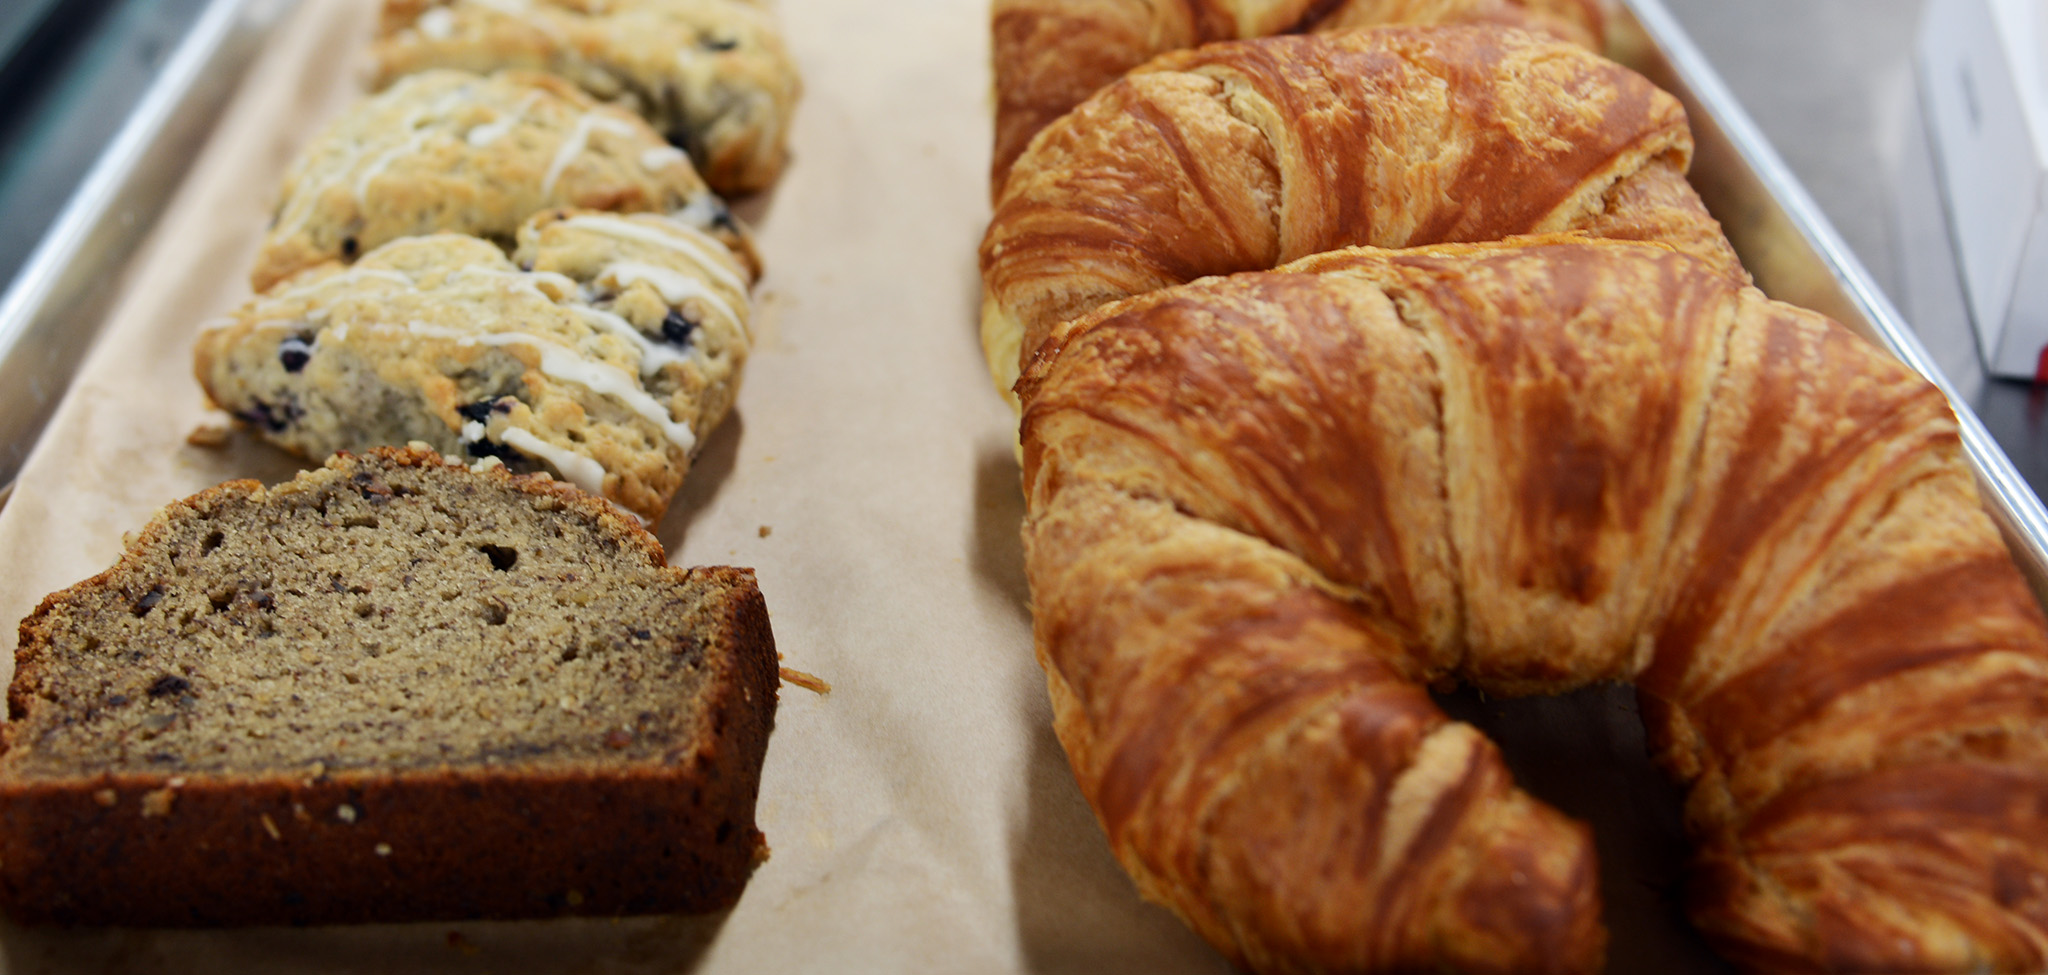 Breakfast with pastries is just a classic way to start your day!